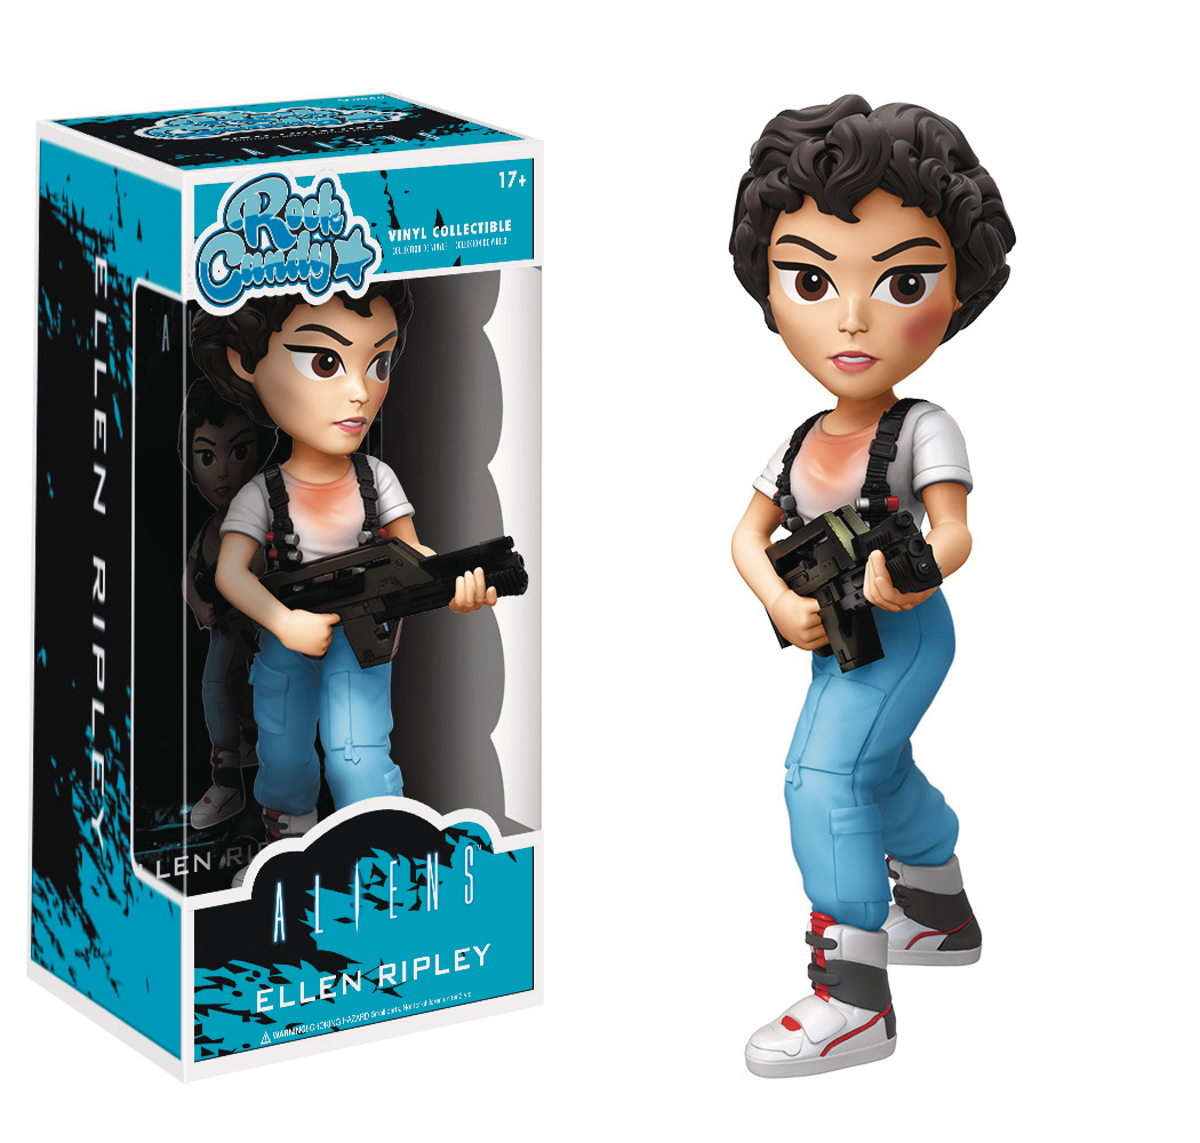 Joining the Rock Candy line is Ellen Ripley, the tough-as-nails warrant off...